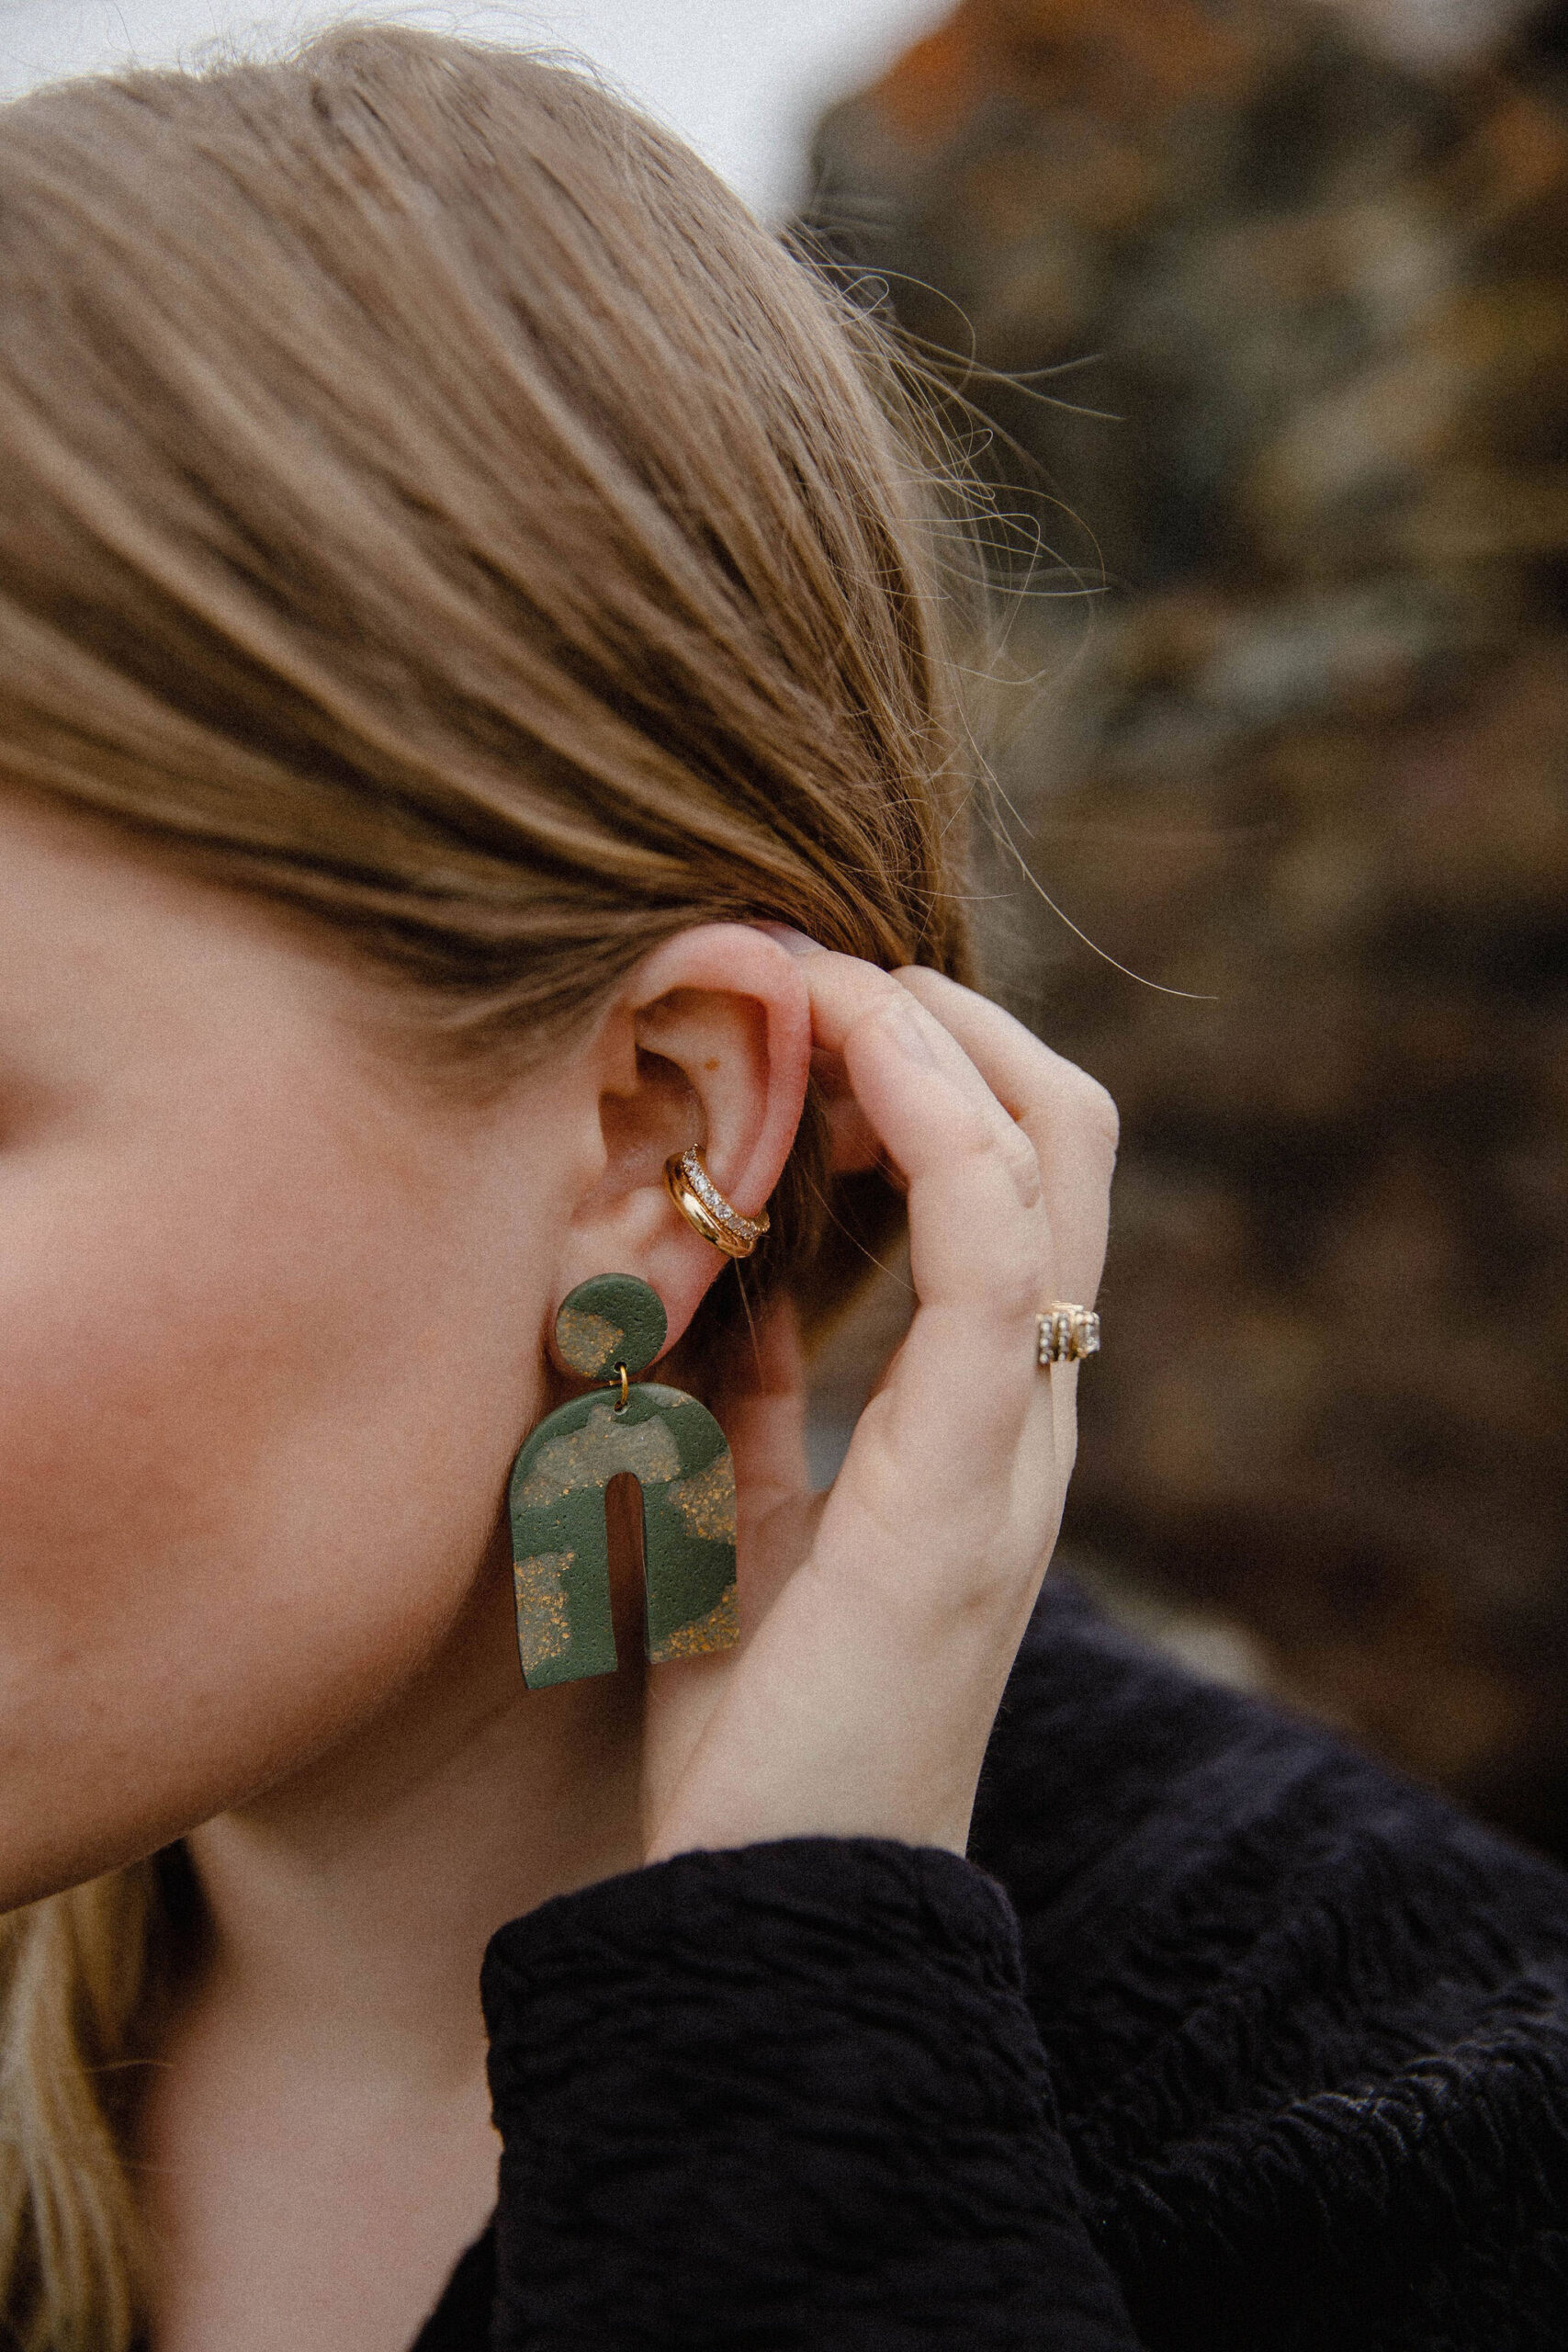 Alyssa Morgan on the Homer Spit modeling a pair of her polymer clay earrings, March 2021. (Photo by Mackenzie Walker of Photos By Kenz)